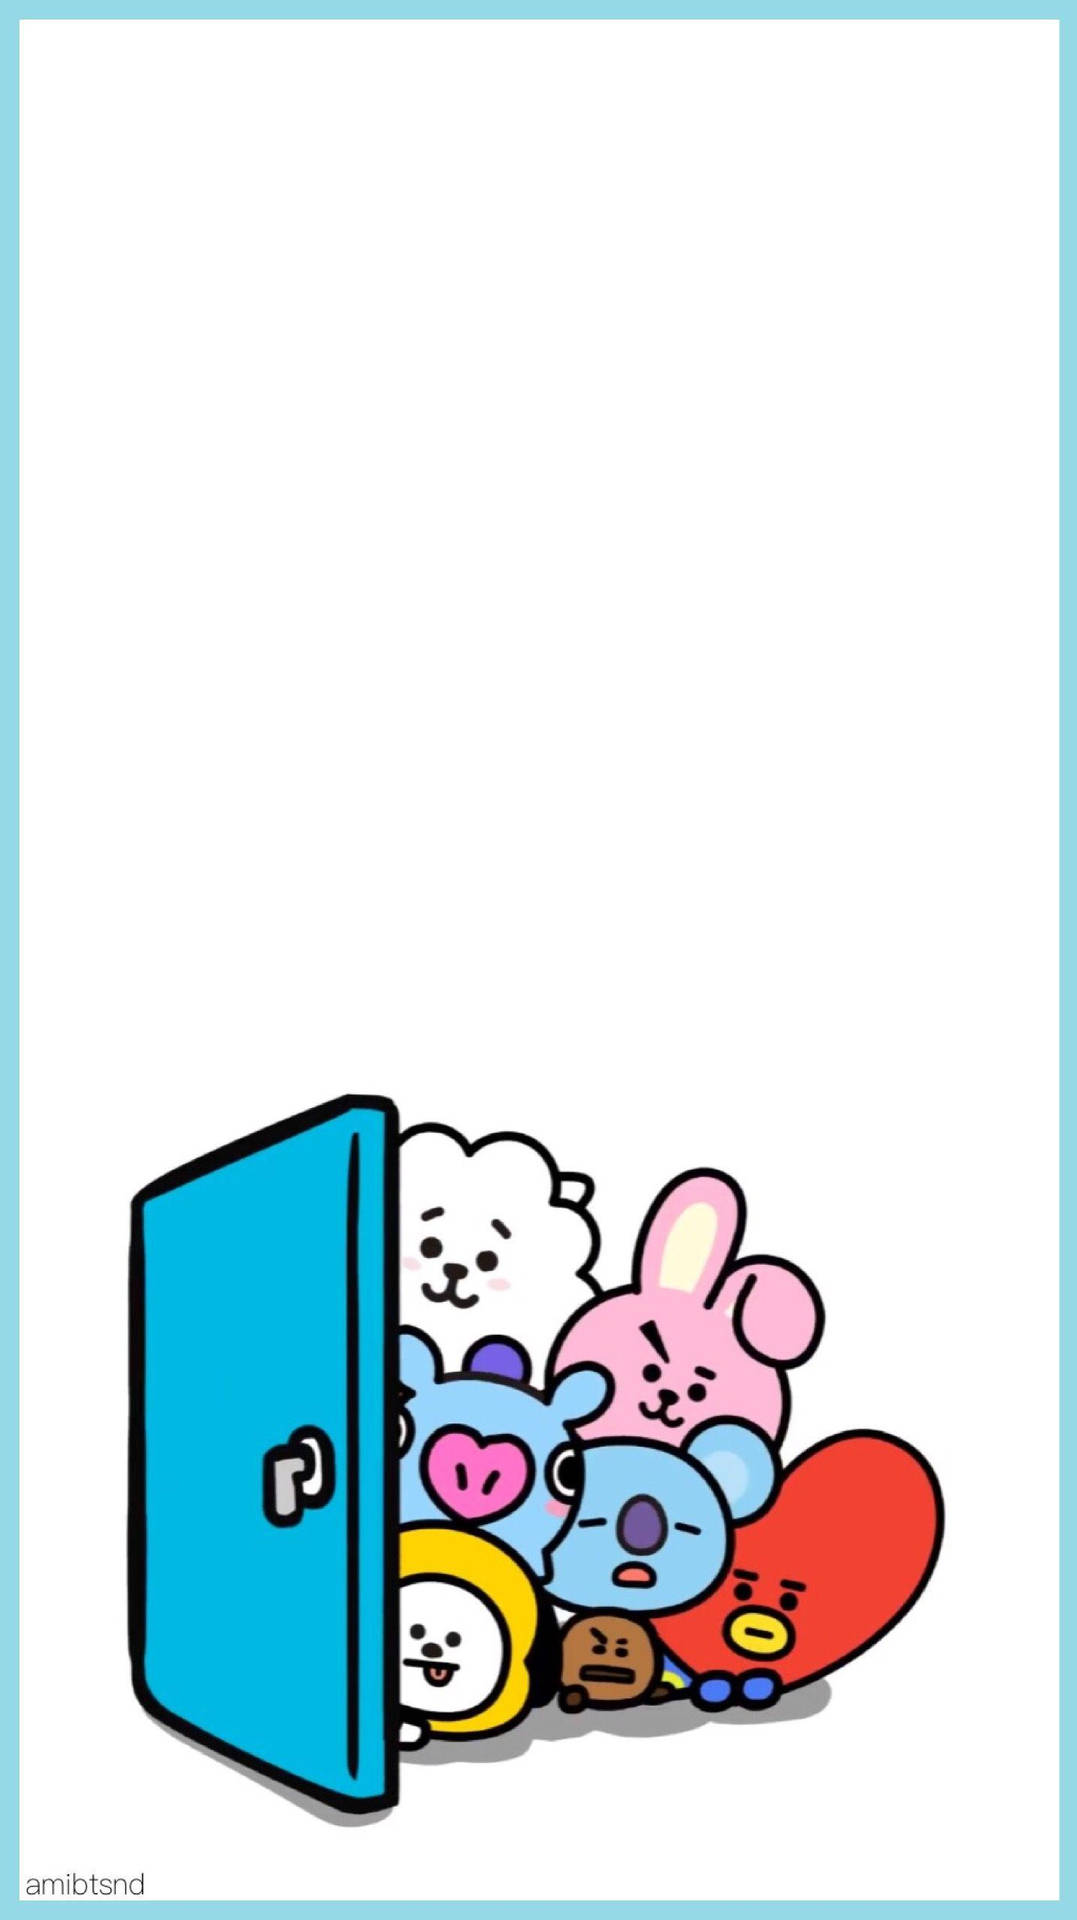 Cooky Bt21 And Friends